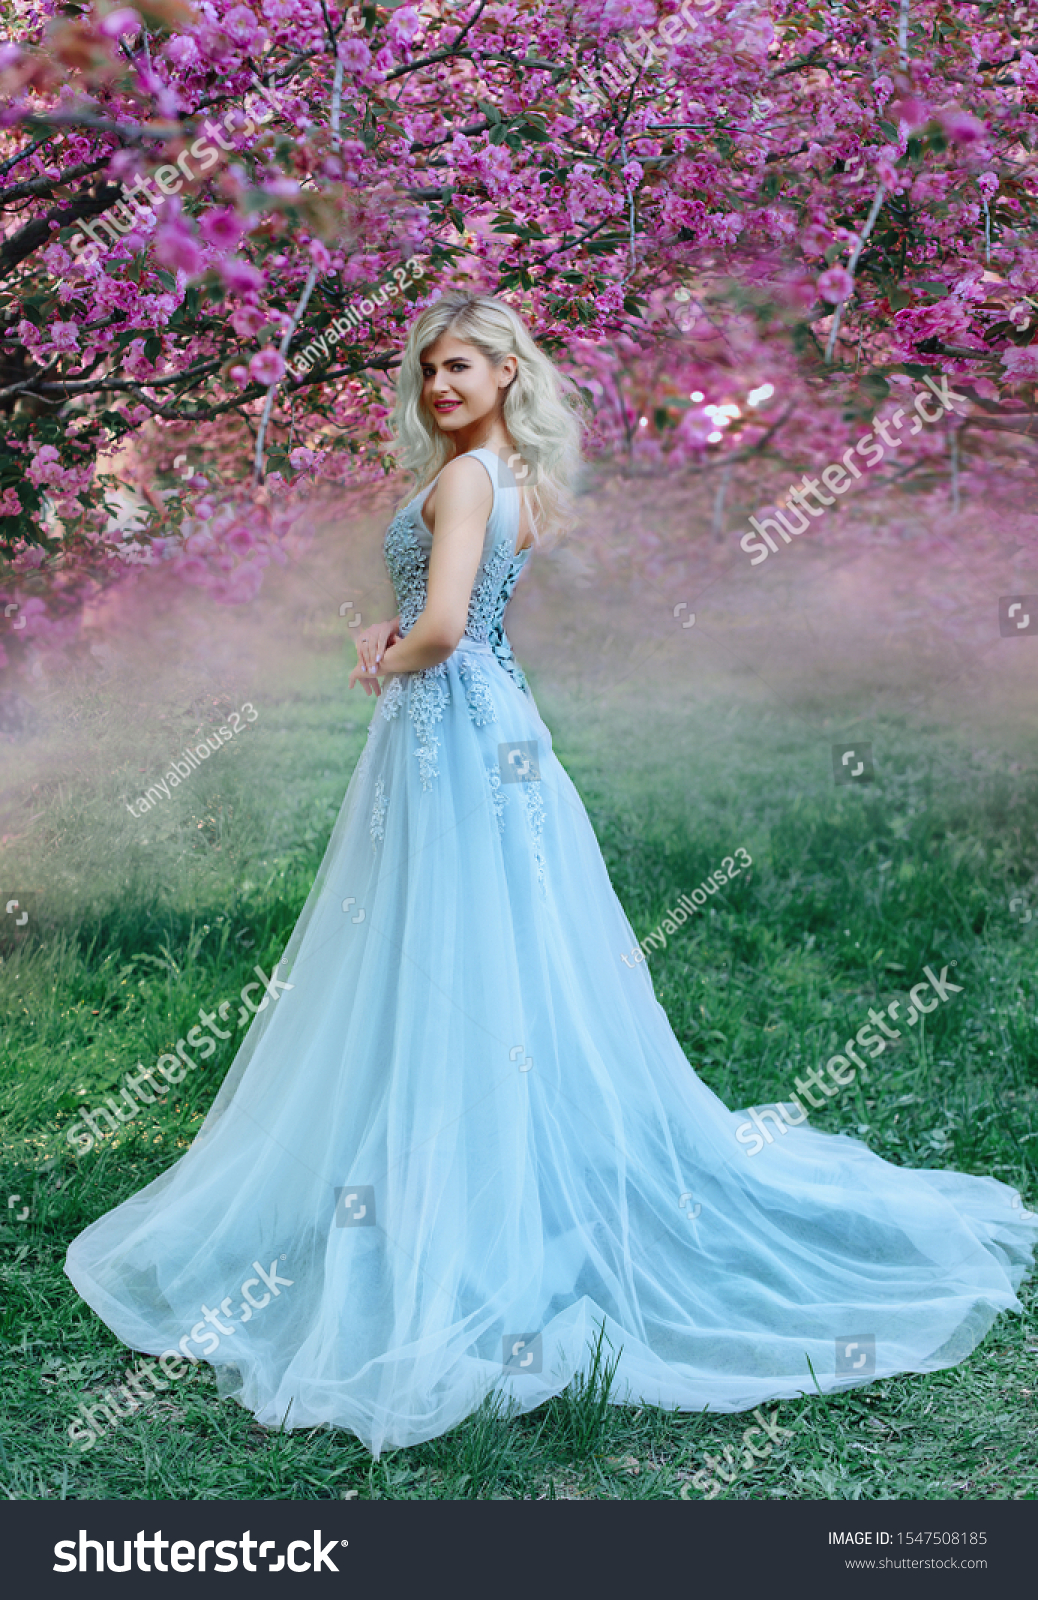 An incredible, delicate blonde in a luxurious, delicately blue dress walks in the spring, sakura and cherry orchards are in bloom. Princess with long curly hair. Vanilla color art photo #1547508185